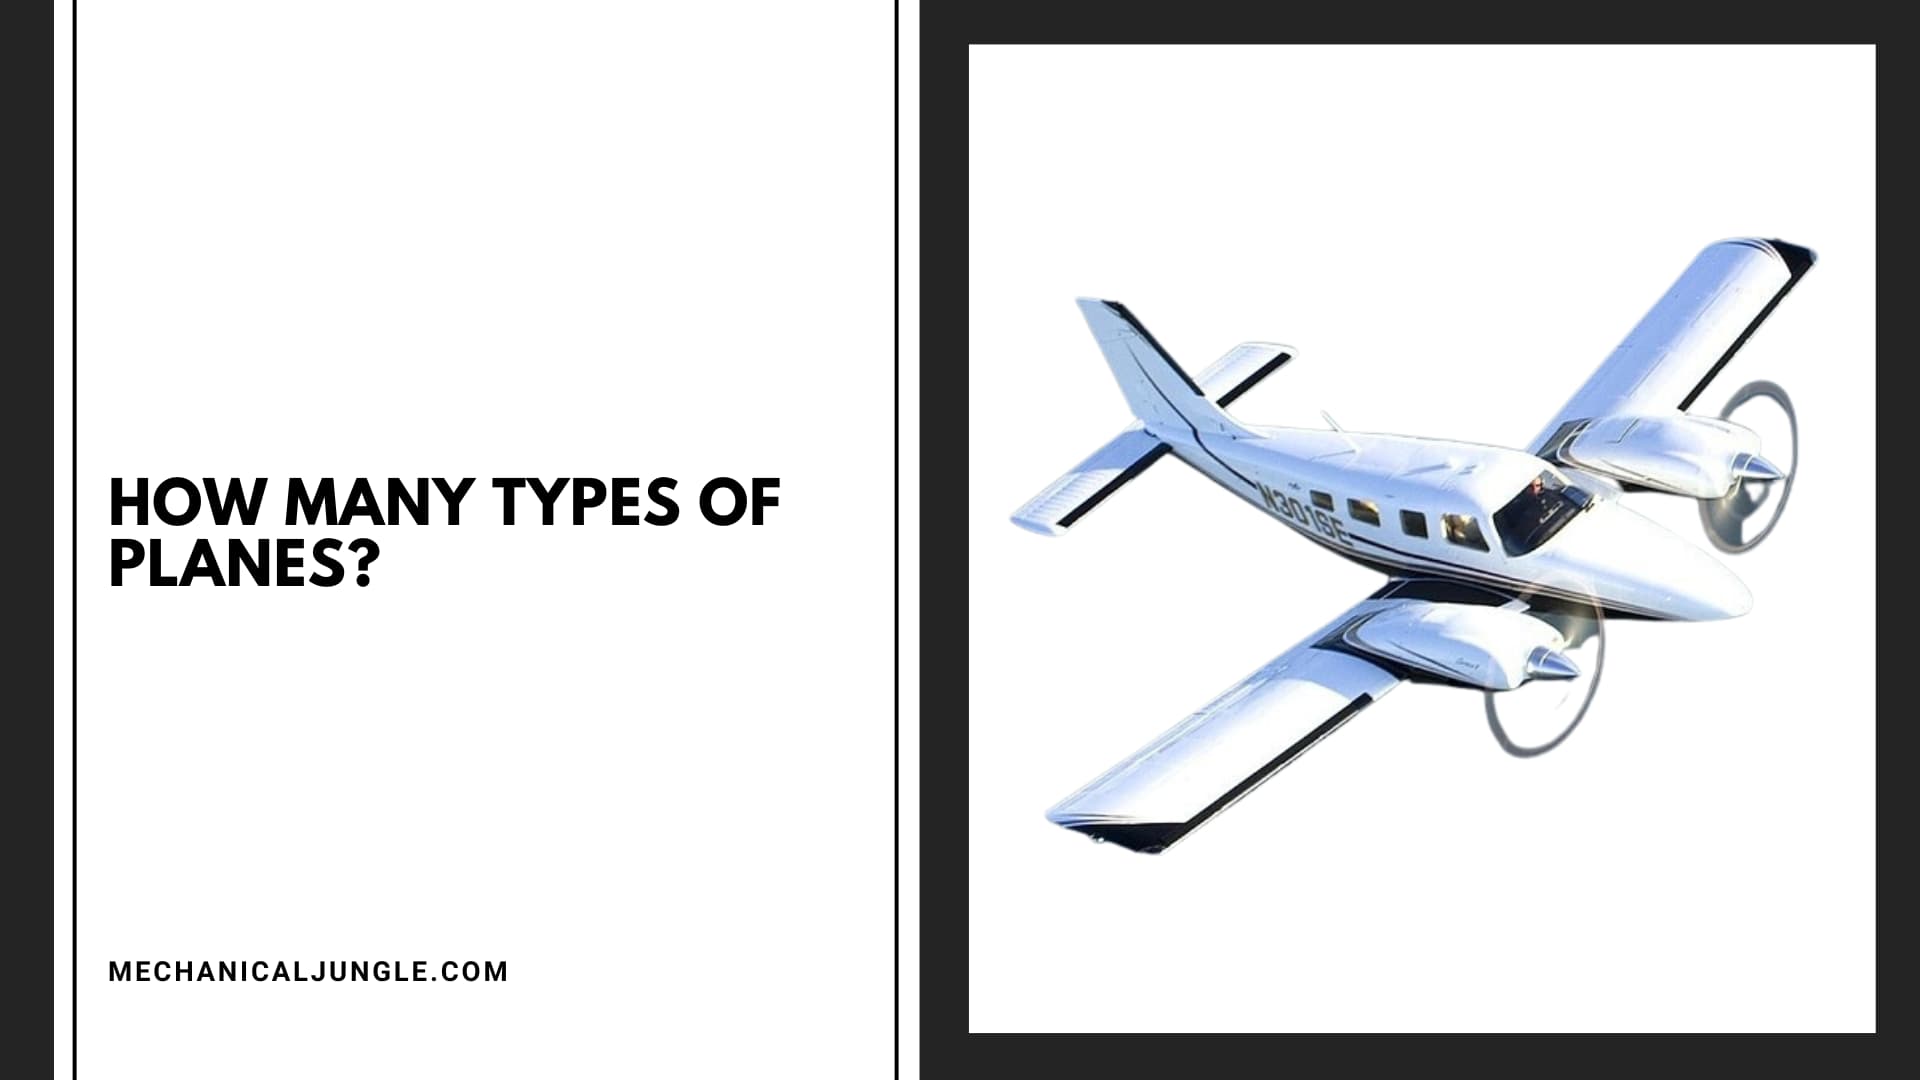 How Many Types of Planes?